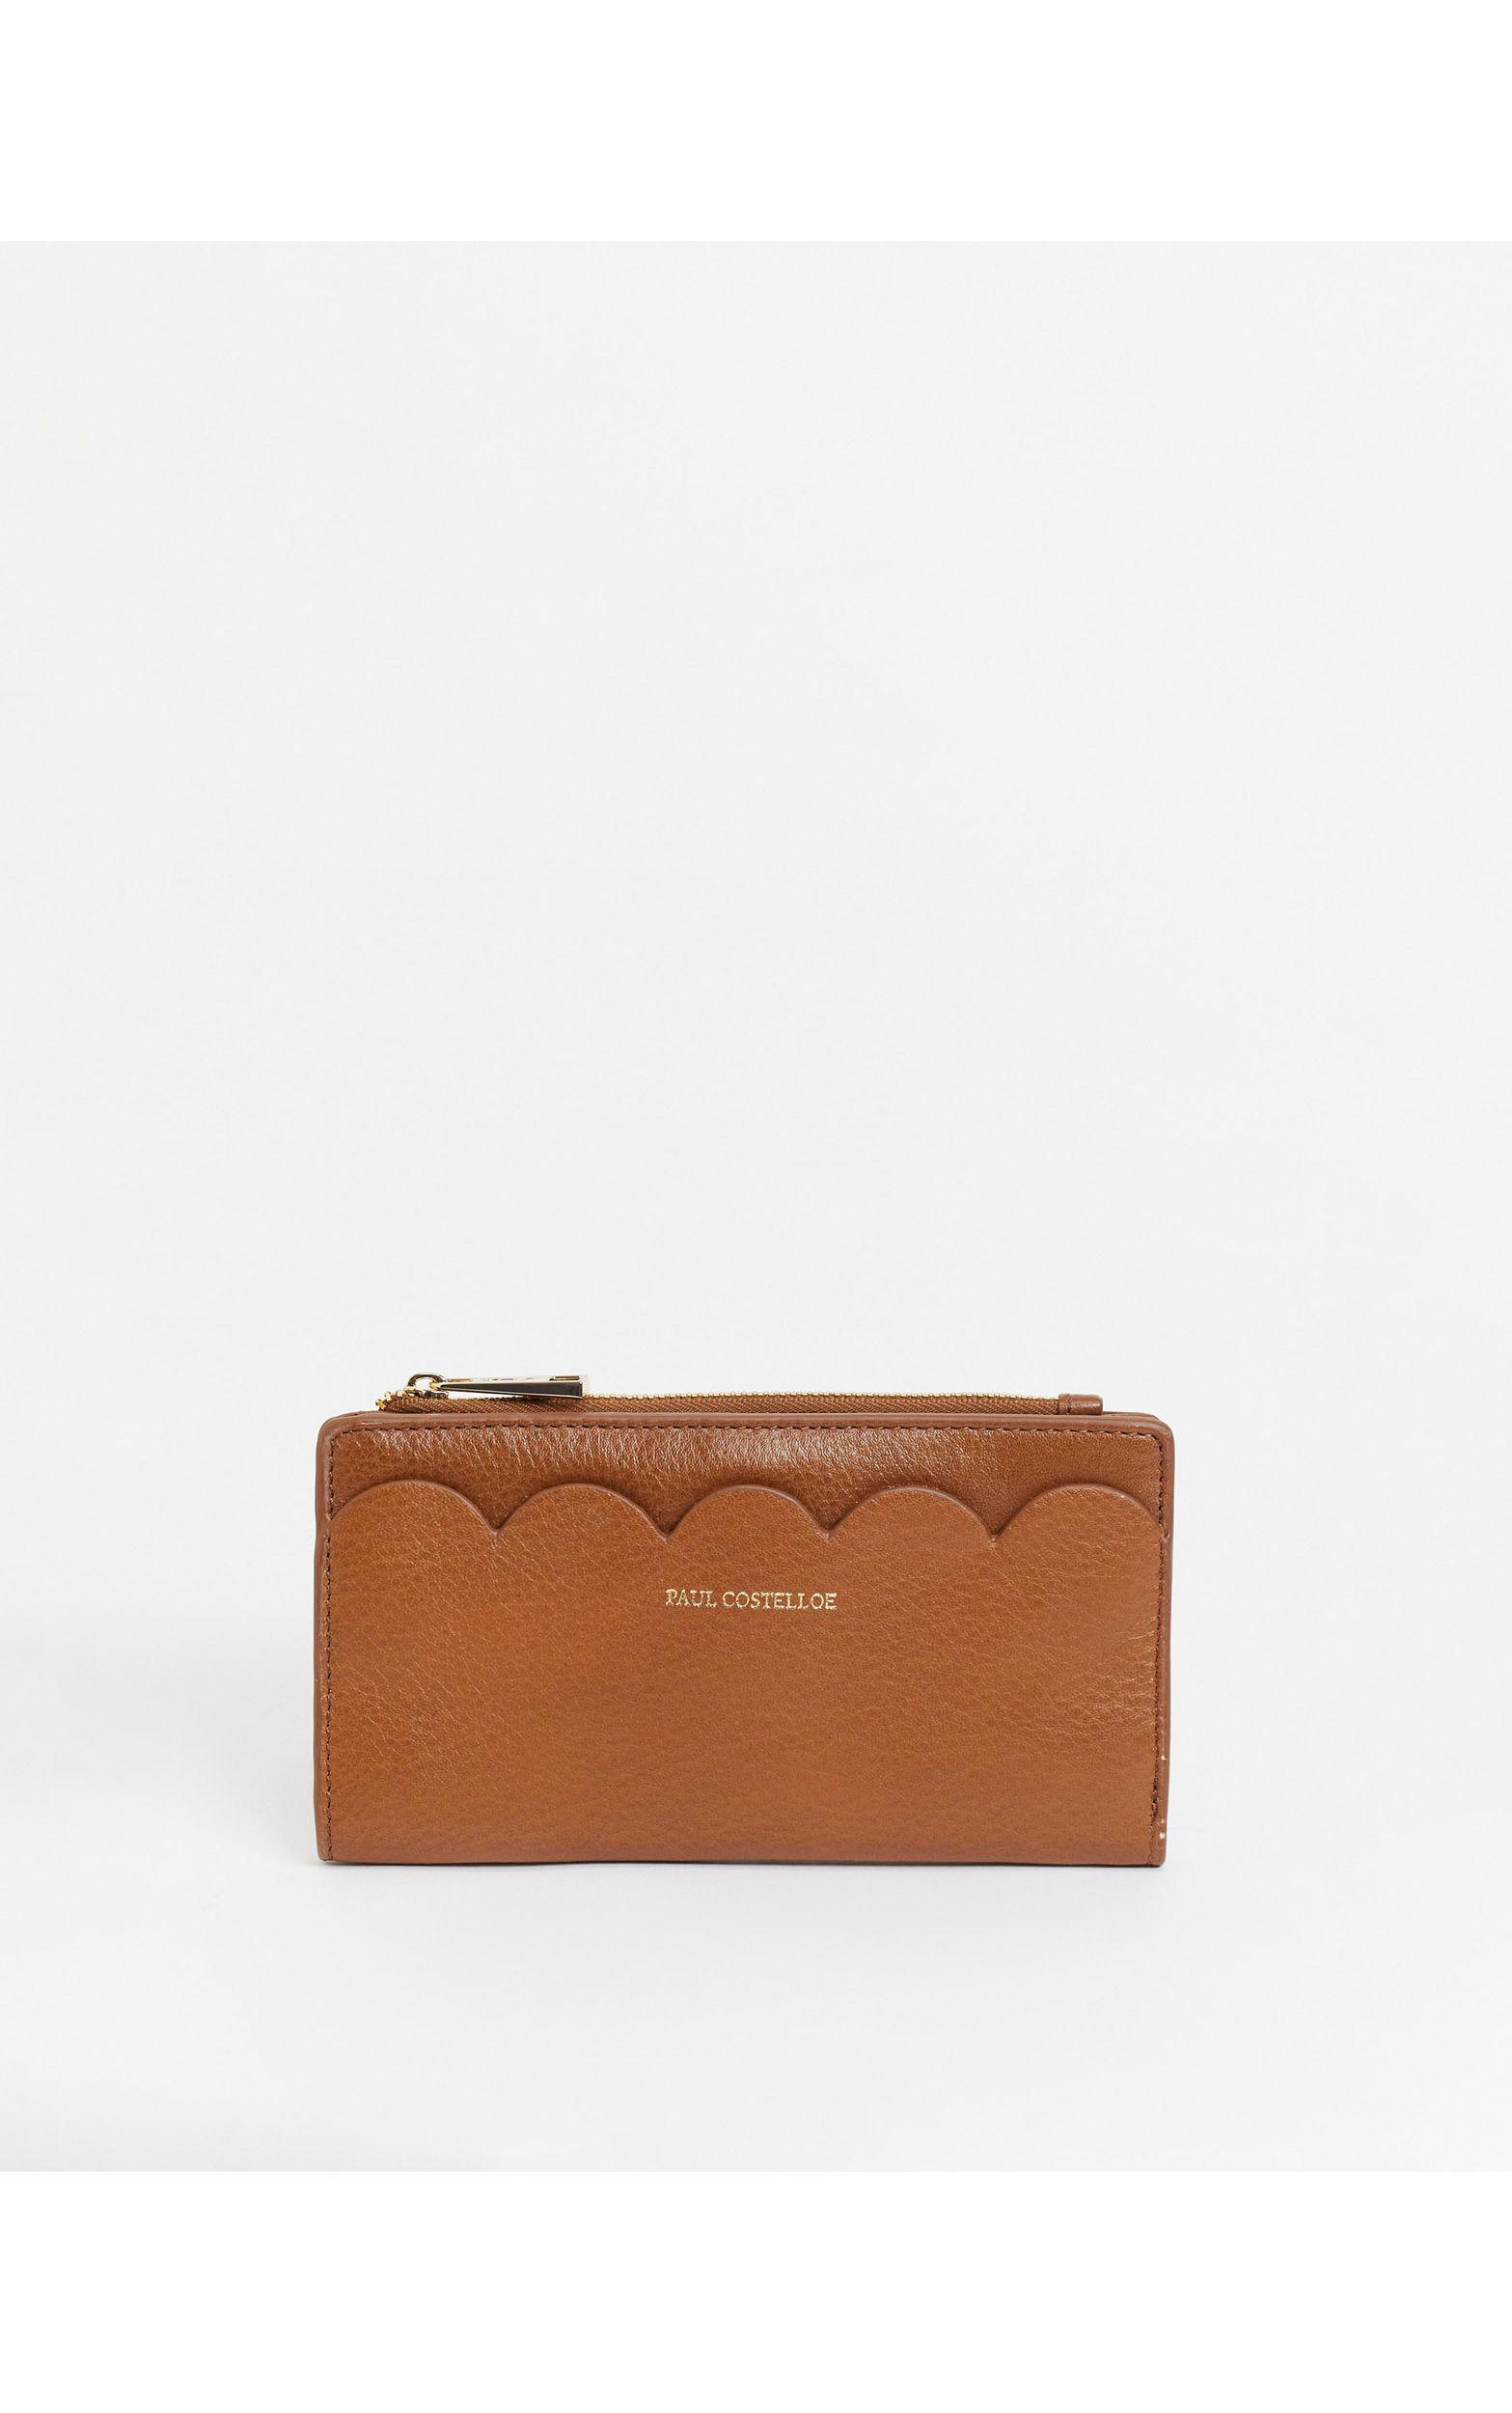 Paul Costelloe Leather Purse With Scalloped Edge in Brown | Lyst